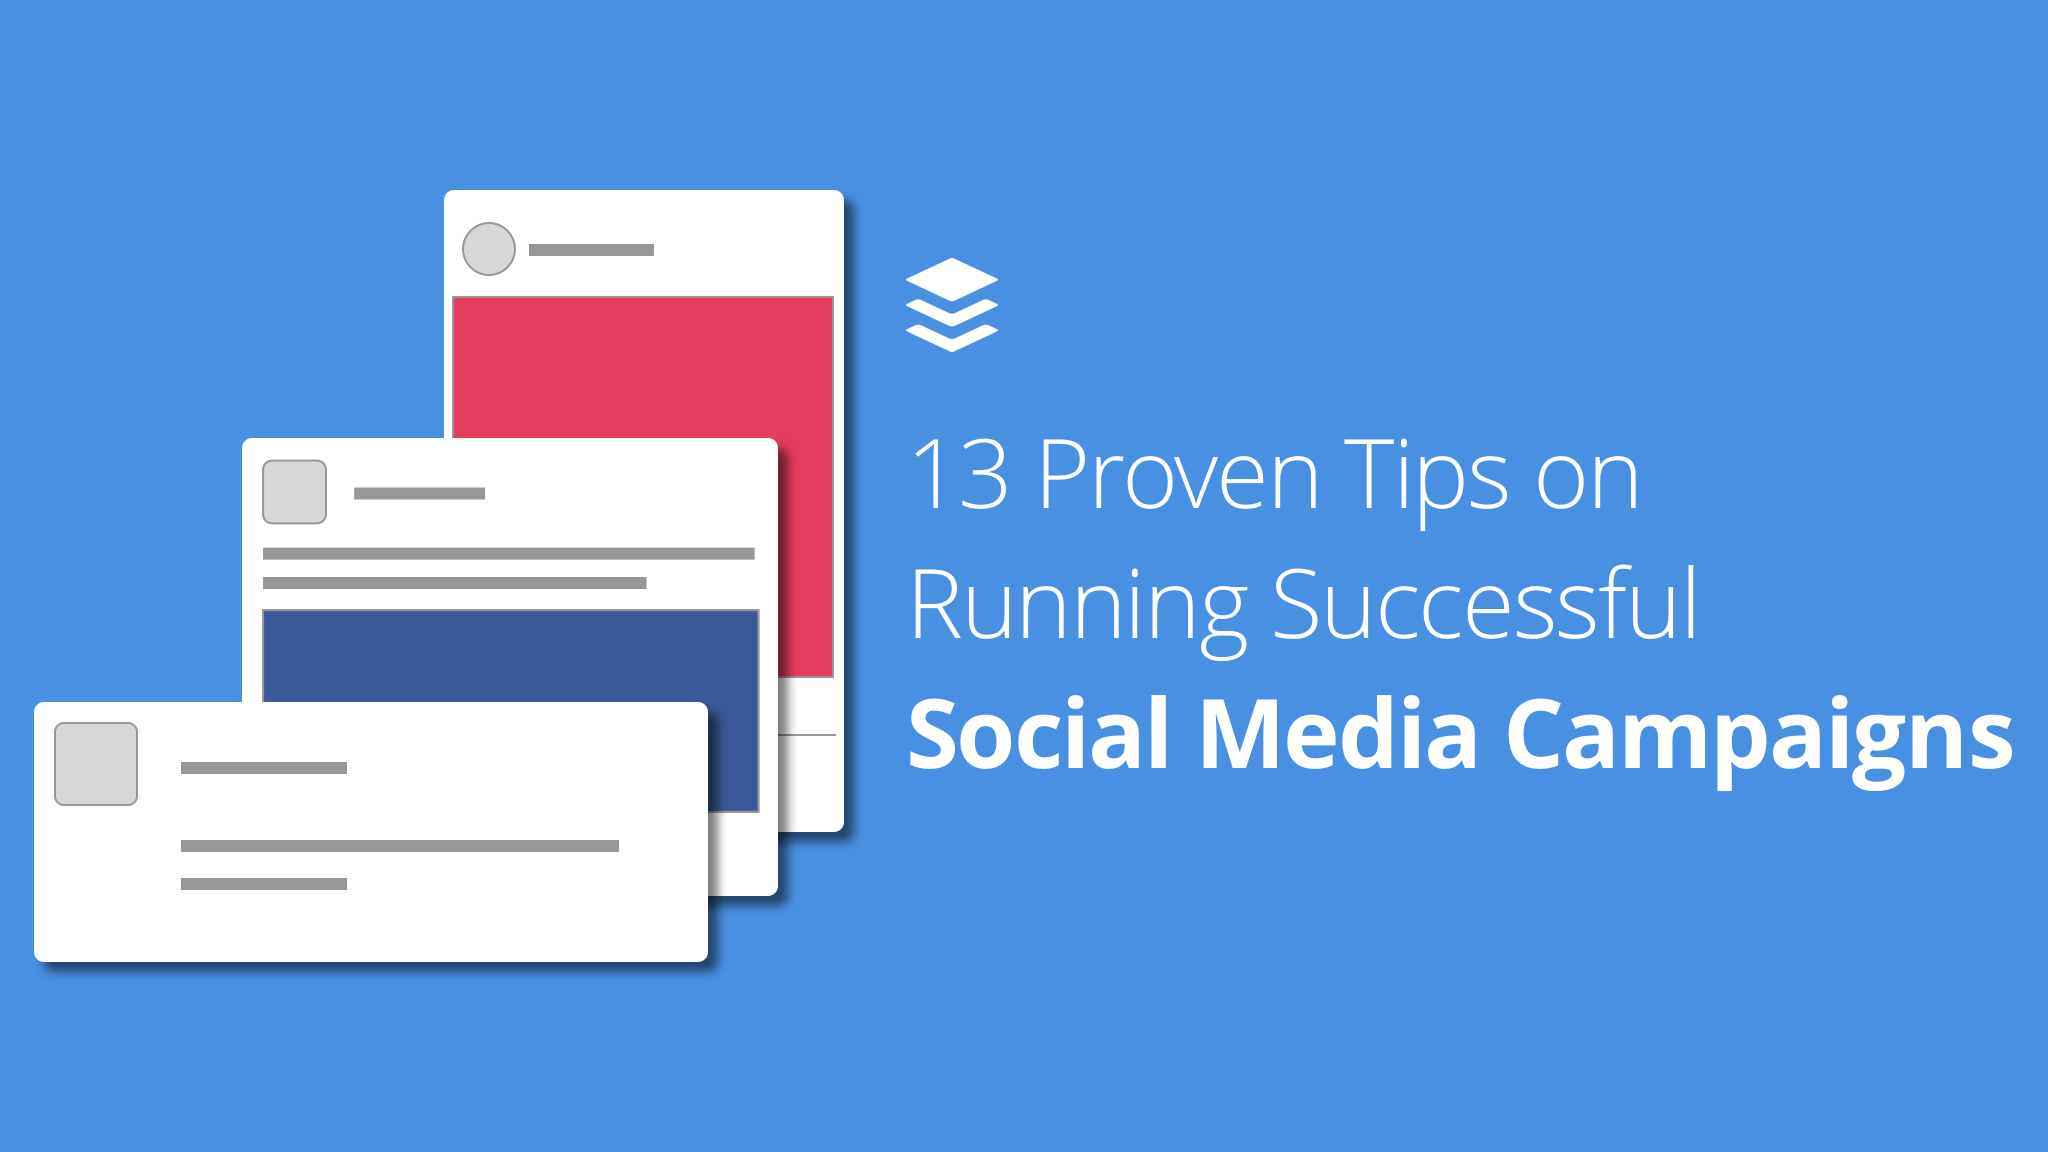 Tips for Social Media Campaigns